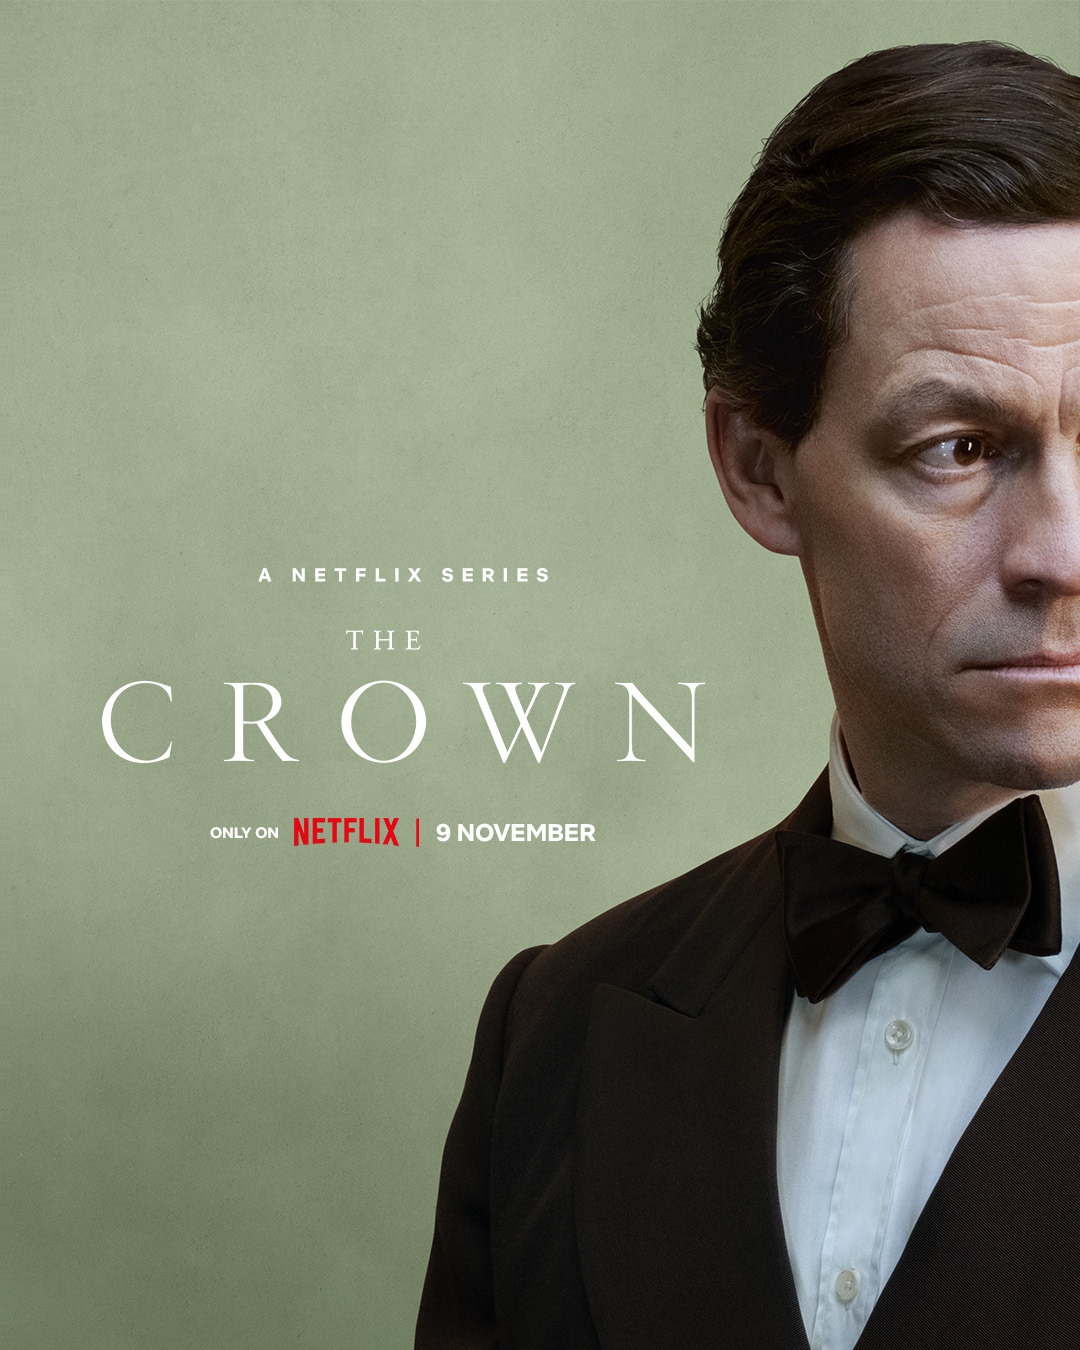 THE CROWN NETWORK — TheCrownNetflix A stellar lineup for a new...